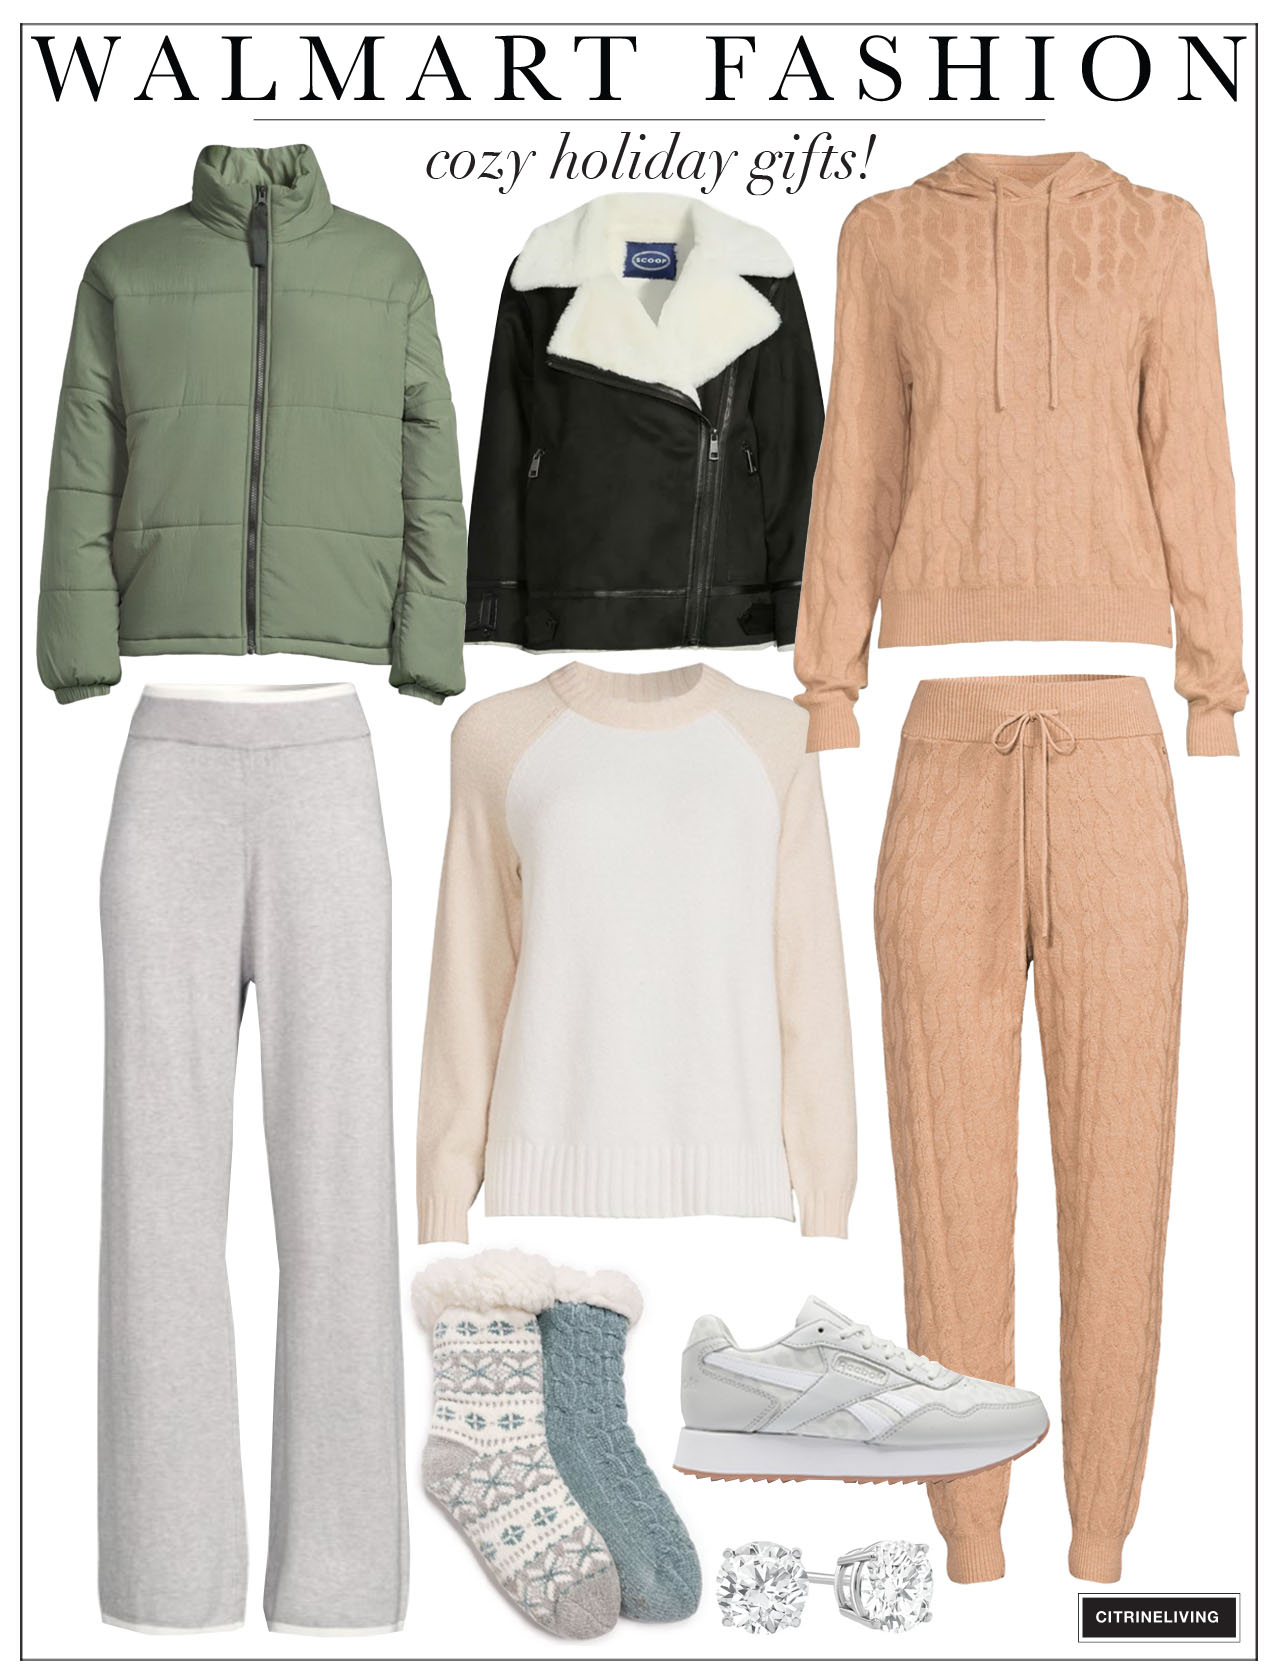 Loungewear collage featuring comfy styles for women - green puffer jacket, knit pants, sneakers, cozy socks, diamond studs, moto jacket with fur lining, cable knit joggers and hoodie.